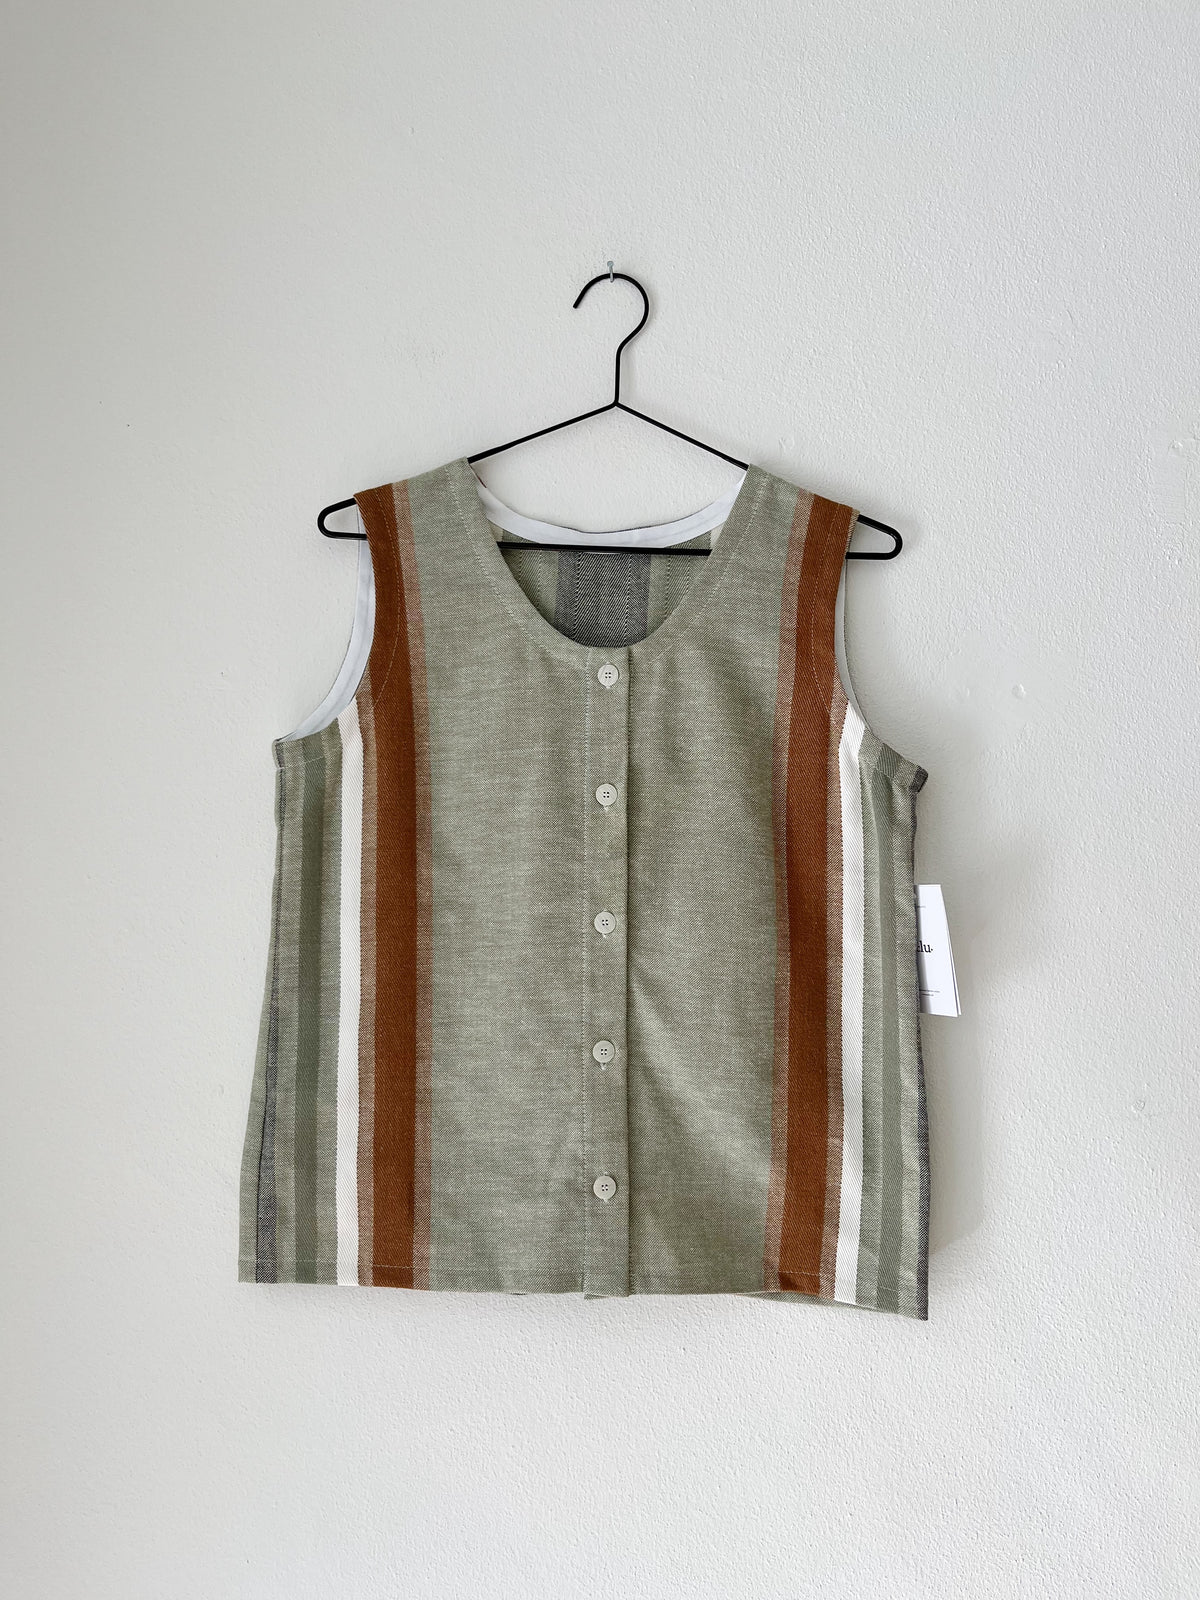 Upcycled stribet top